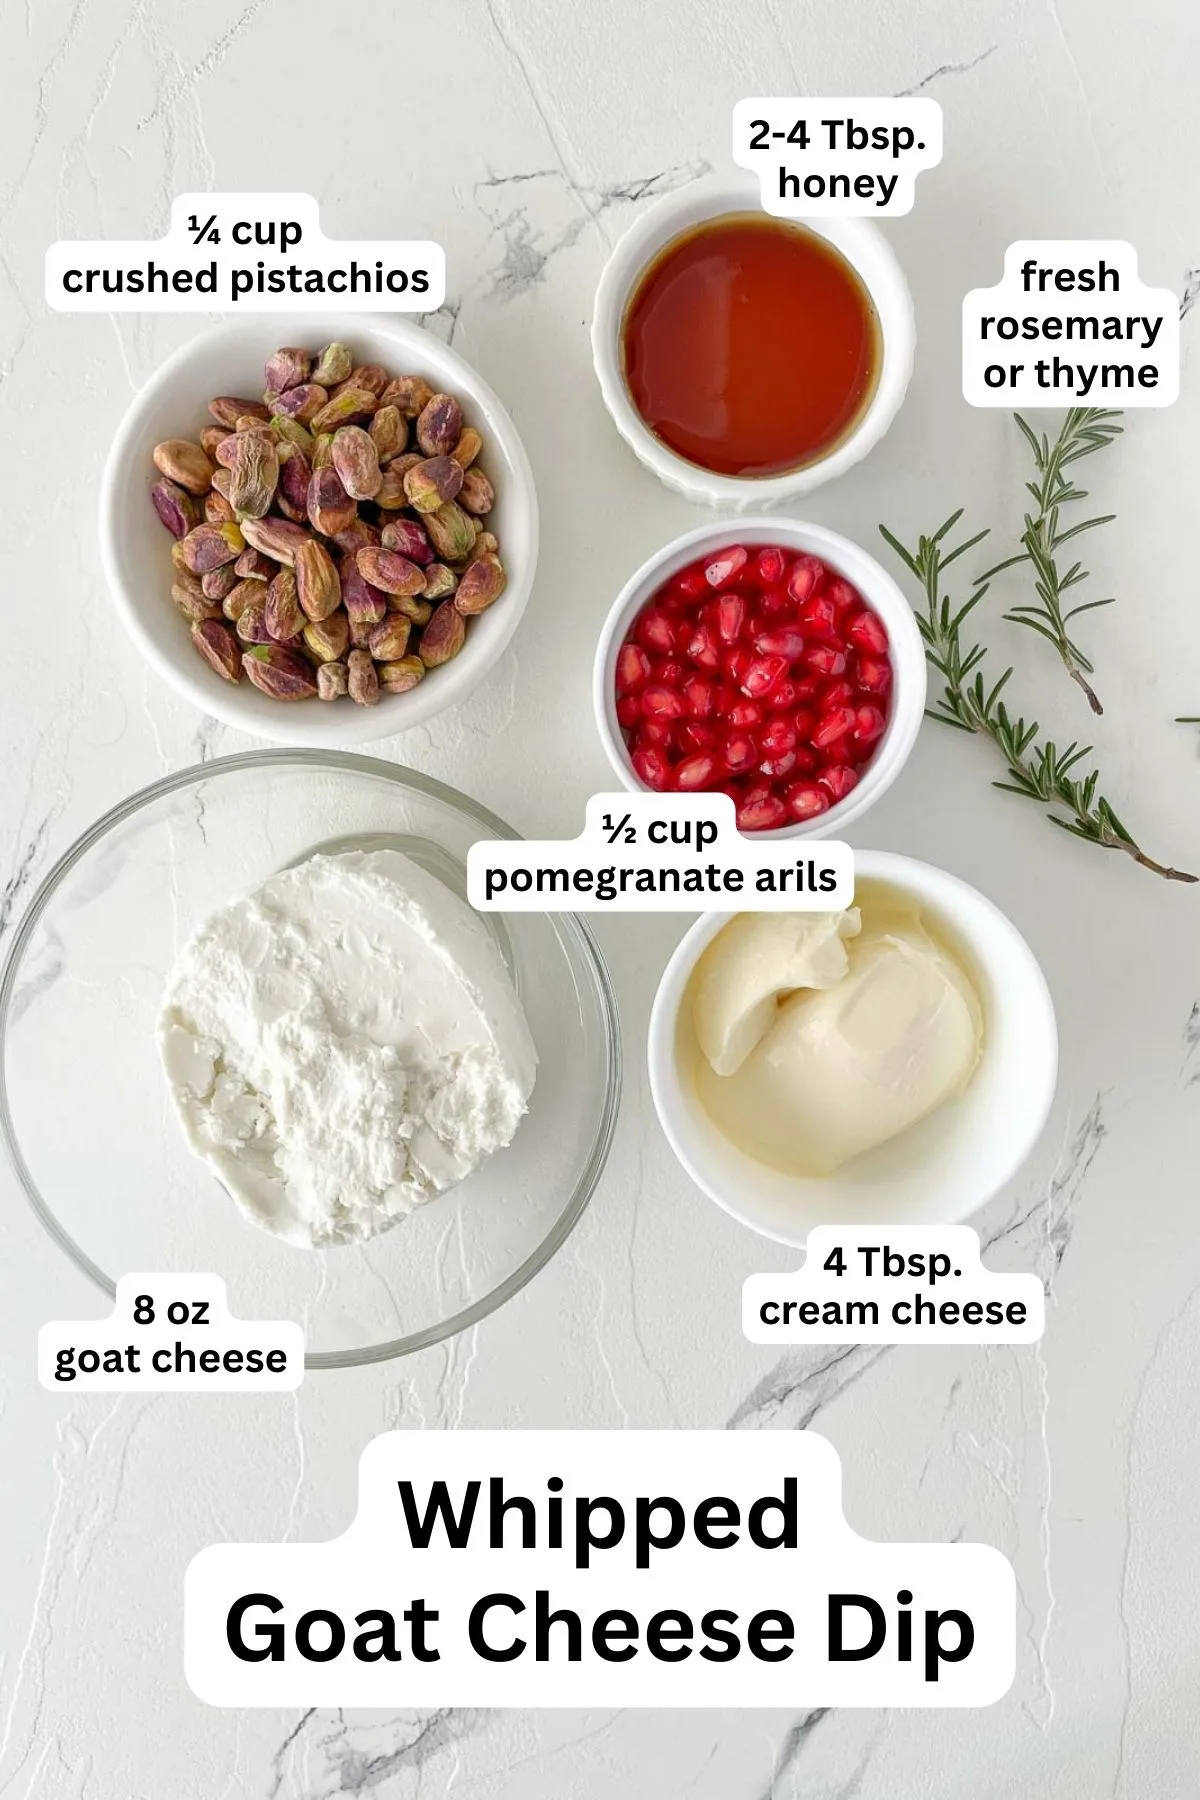 Ingredients to make whipped goat cheese dip with toppings